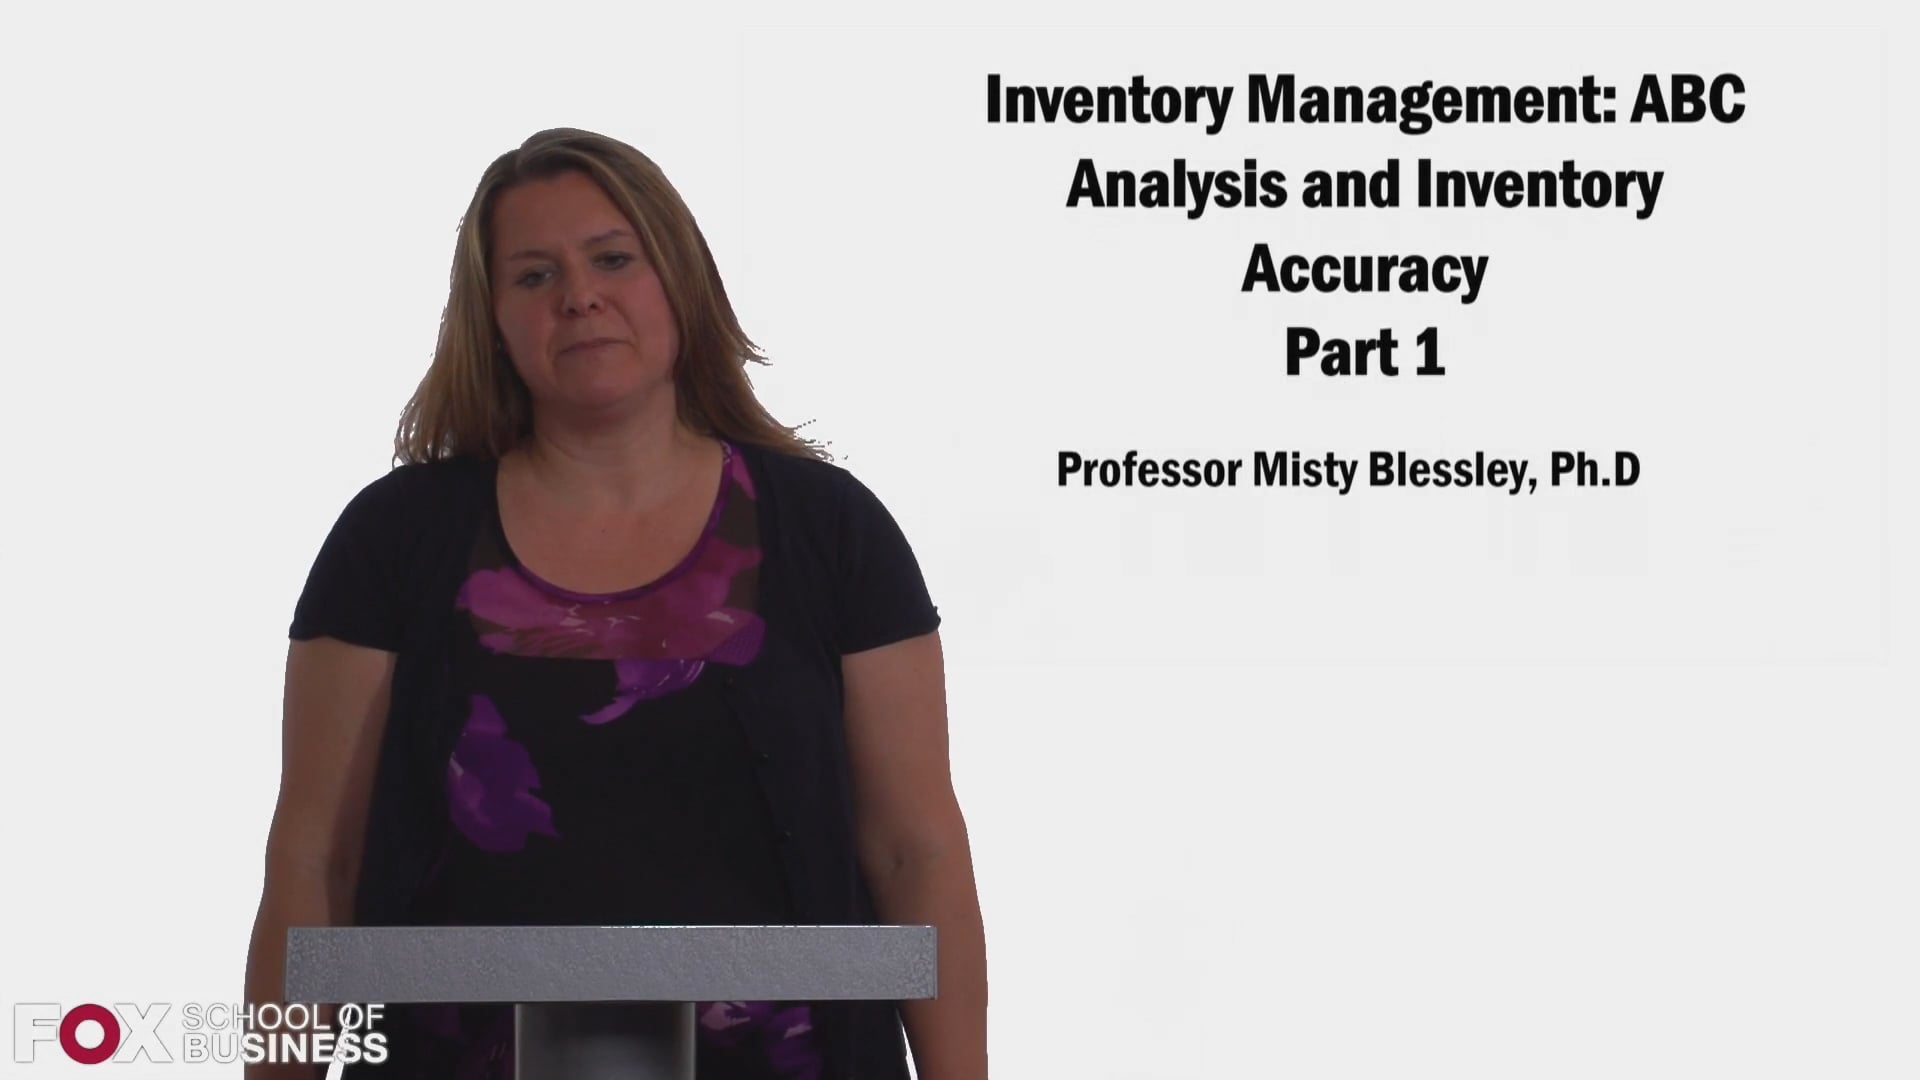 Inventory Management: ABC Analysis and Inventory Accuracy Part 1